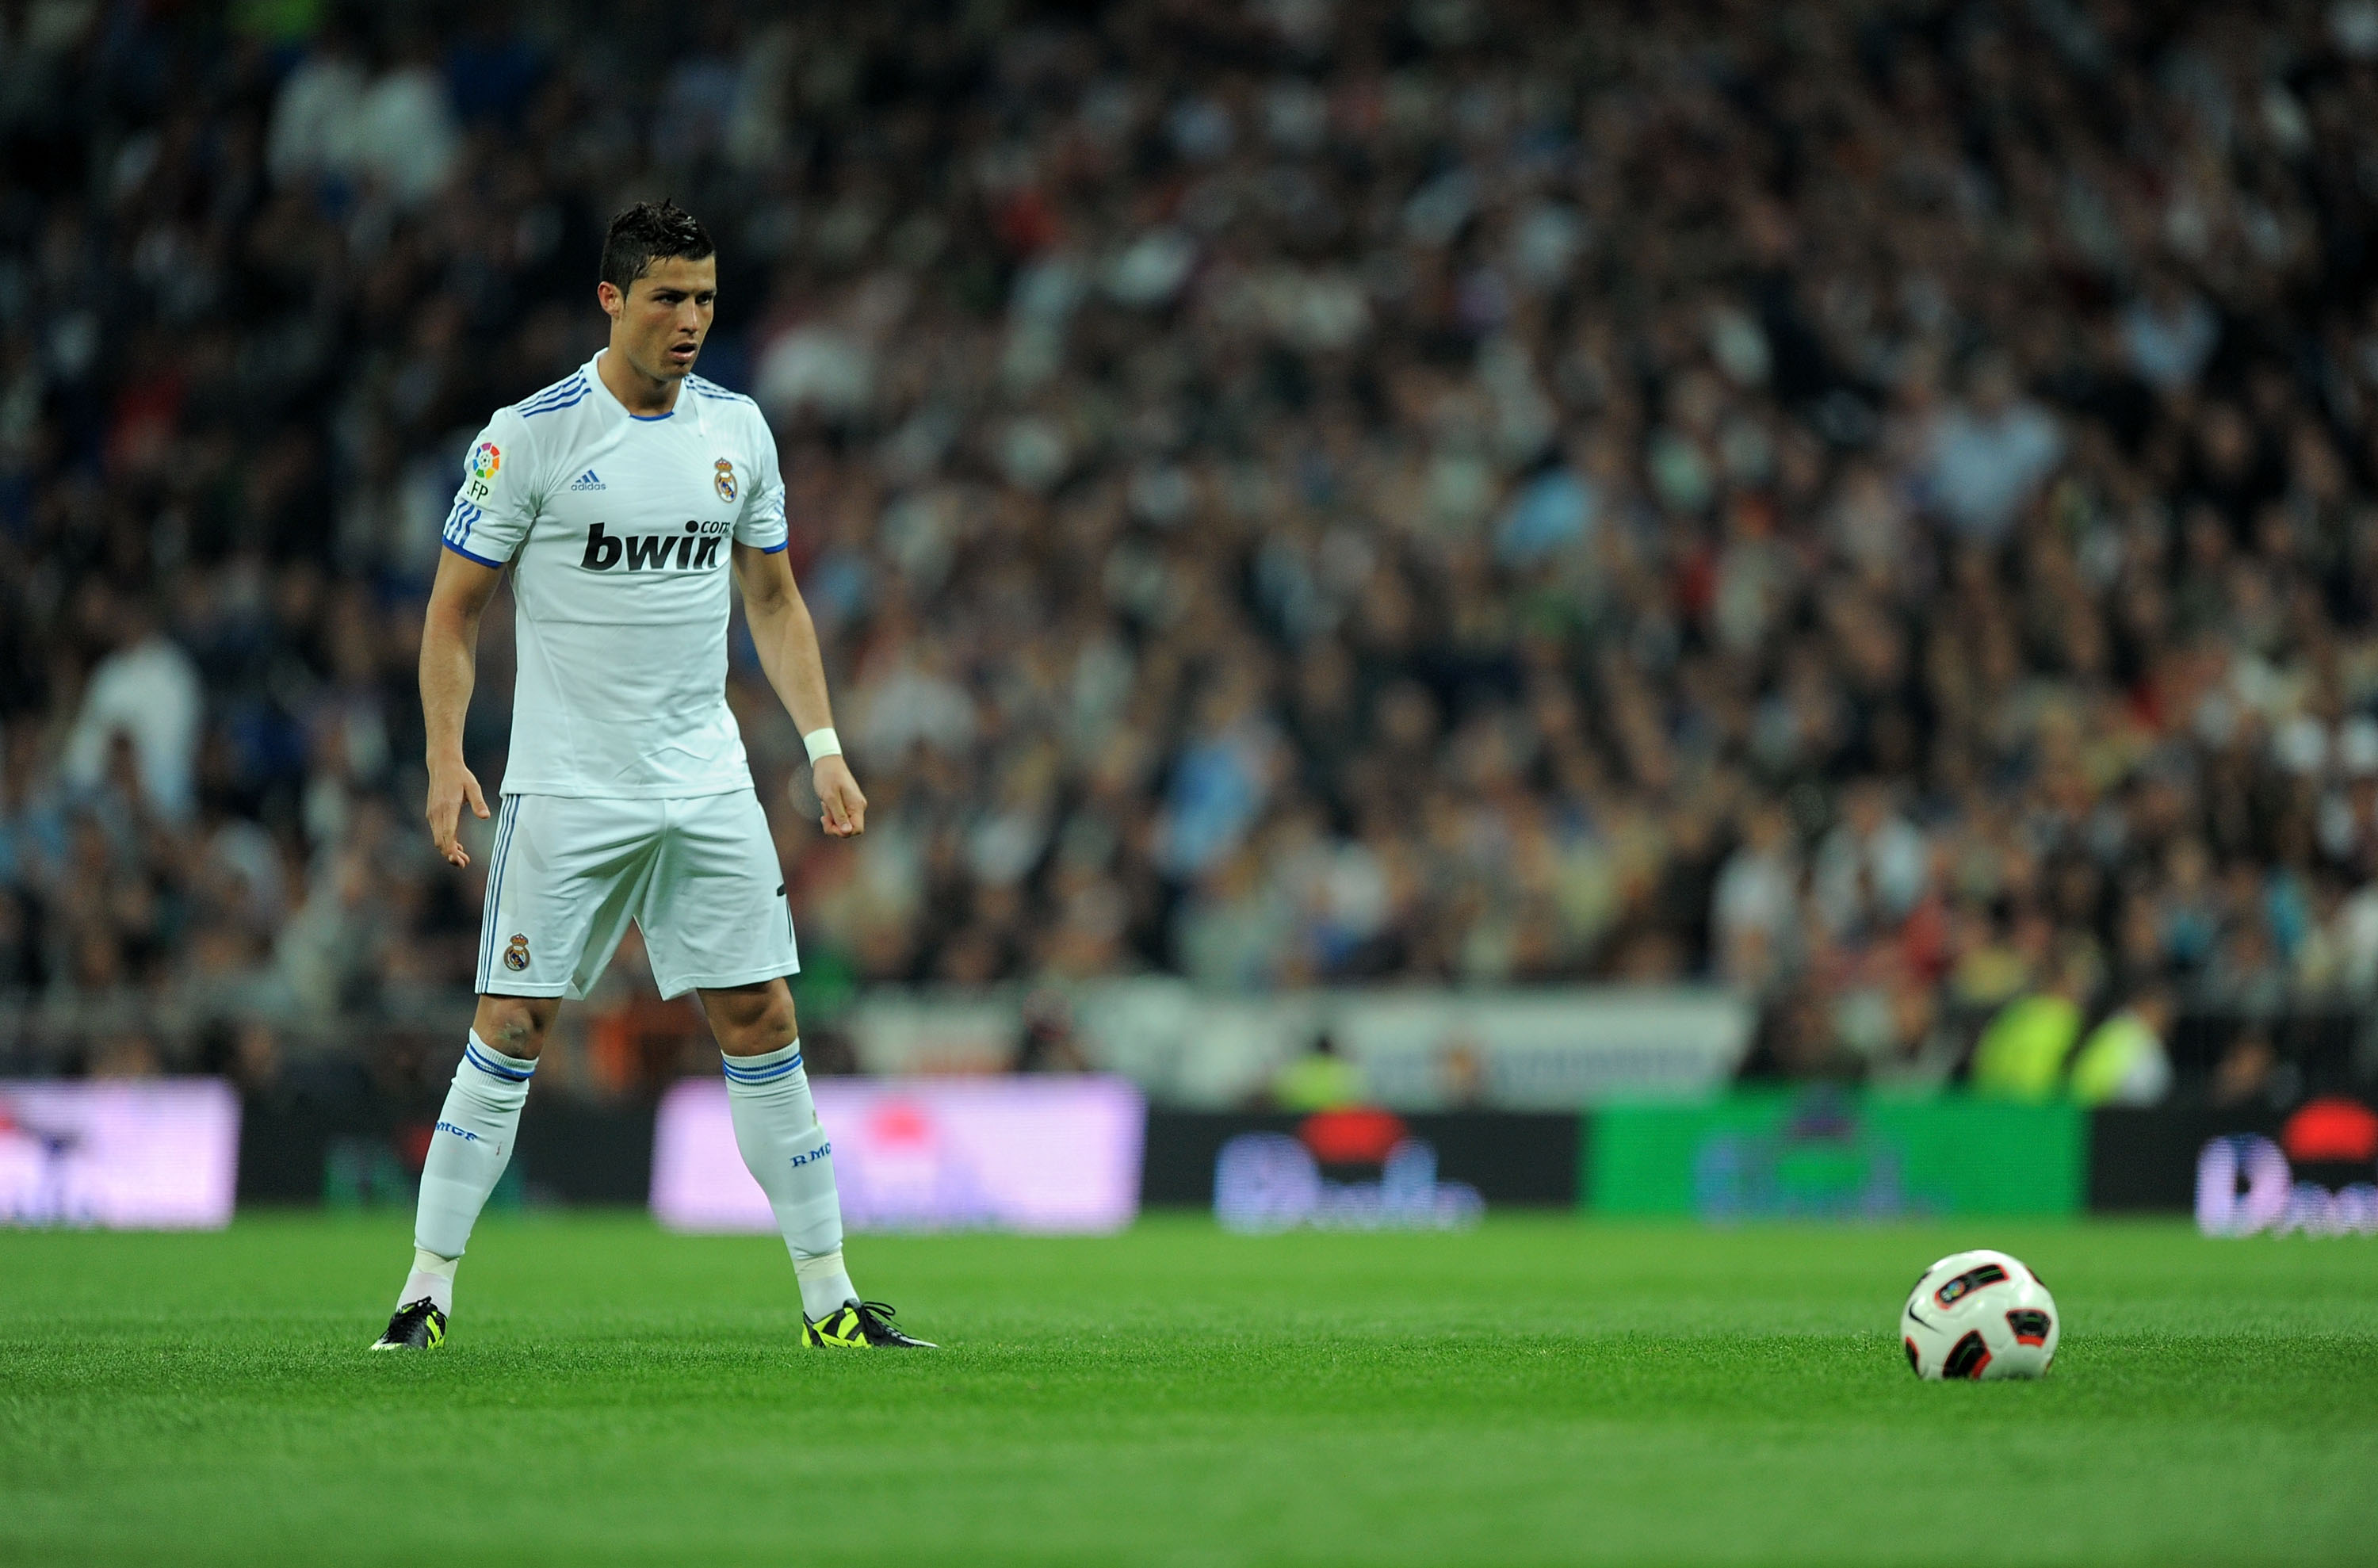 MADRID, SPAIN - APRIL 16:  Cristiano Ronaldo of Real Madrid lines up a free kick during the La Liga match between Real Madrid and Barcelona at Estadio Santiago Bernabeu on April 16, 2011 in Madrid, Spain.  (Photo by Denis Doyle/Getty Images)